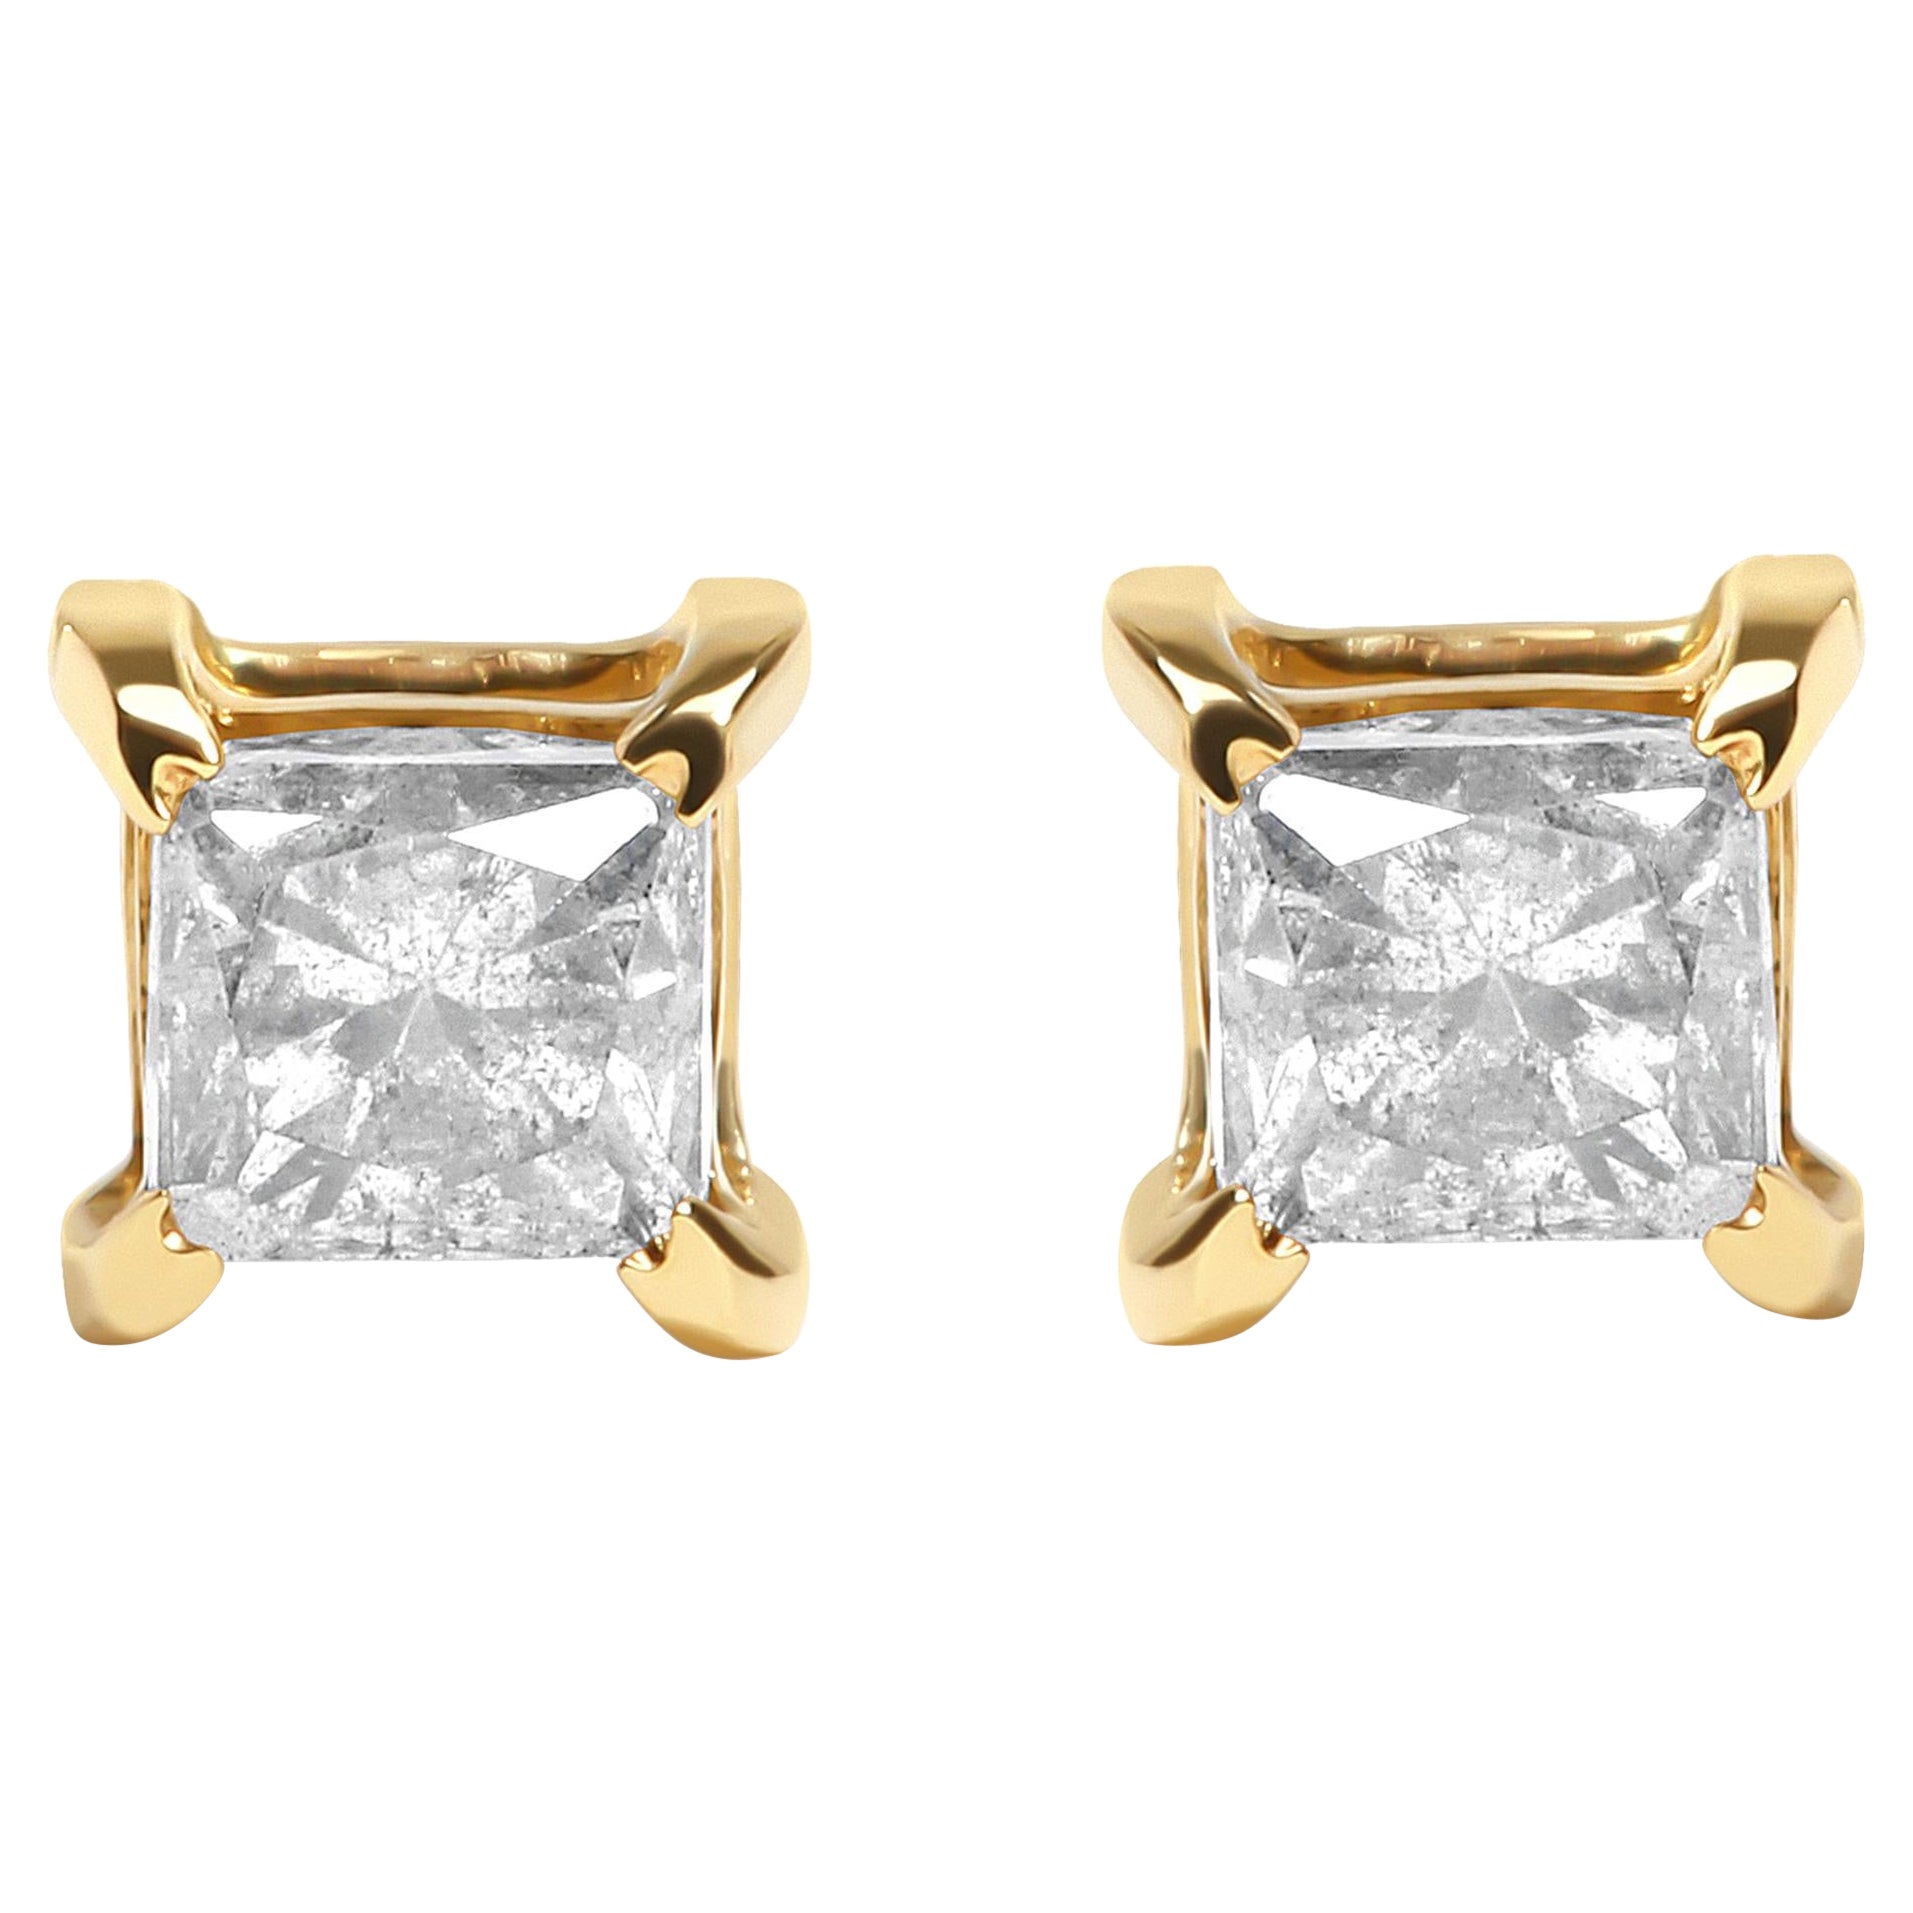 10K Yellow Gold 5/8 Carat Princess Cut Diamond 4-Prong Solitaire Stud Earrings For Sale